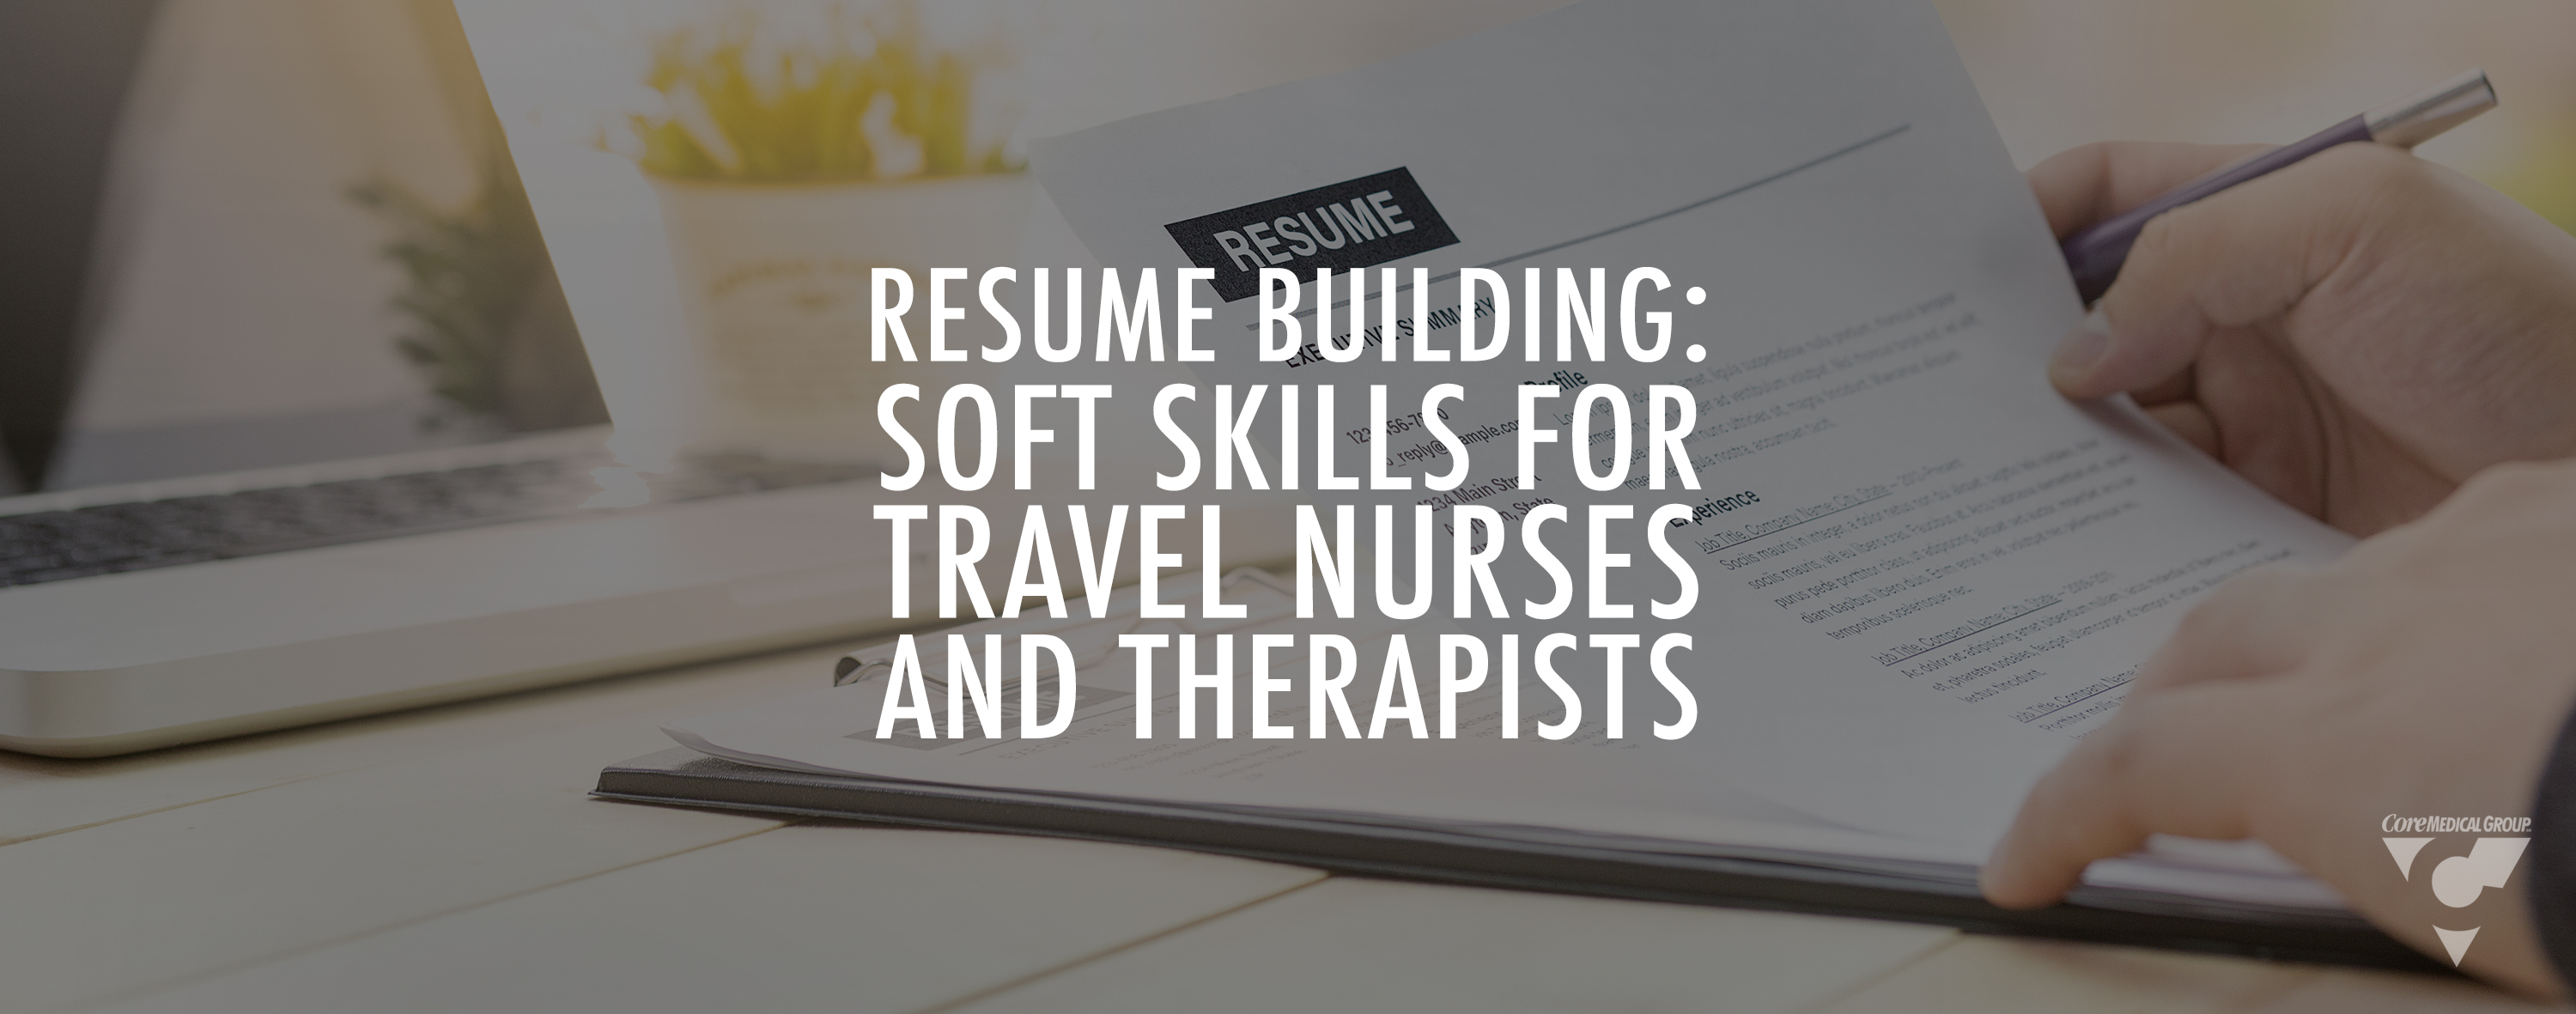 Resume Building: Soft Skills for Travel Nurses and Therapists